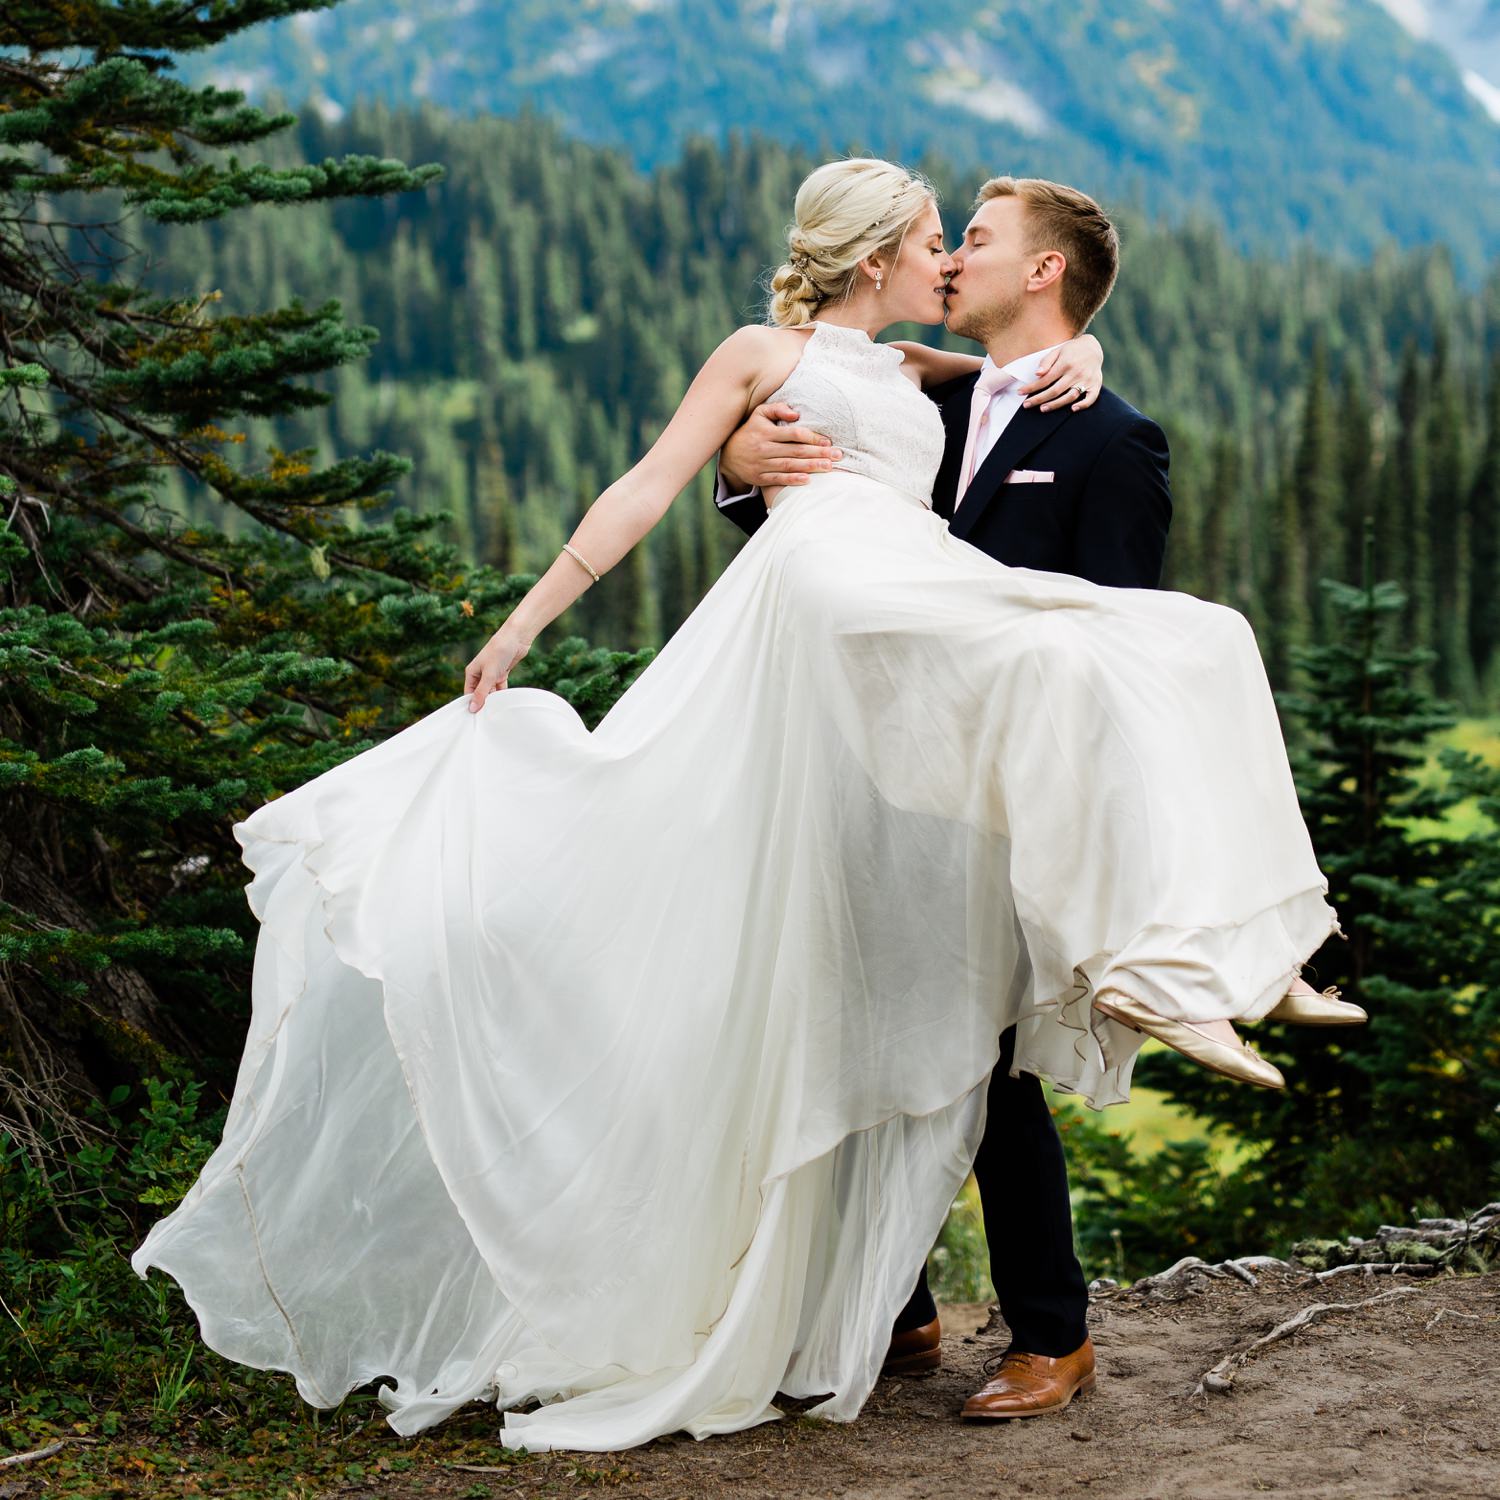 photography session with couple's elopement at mount rainier national park in washington state